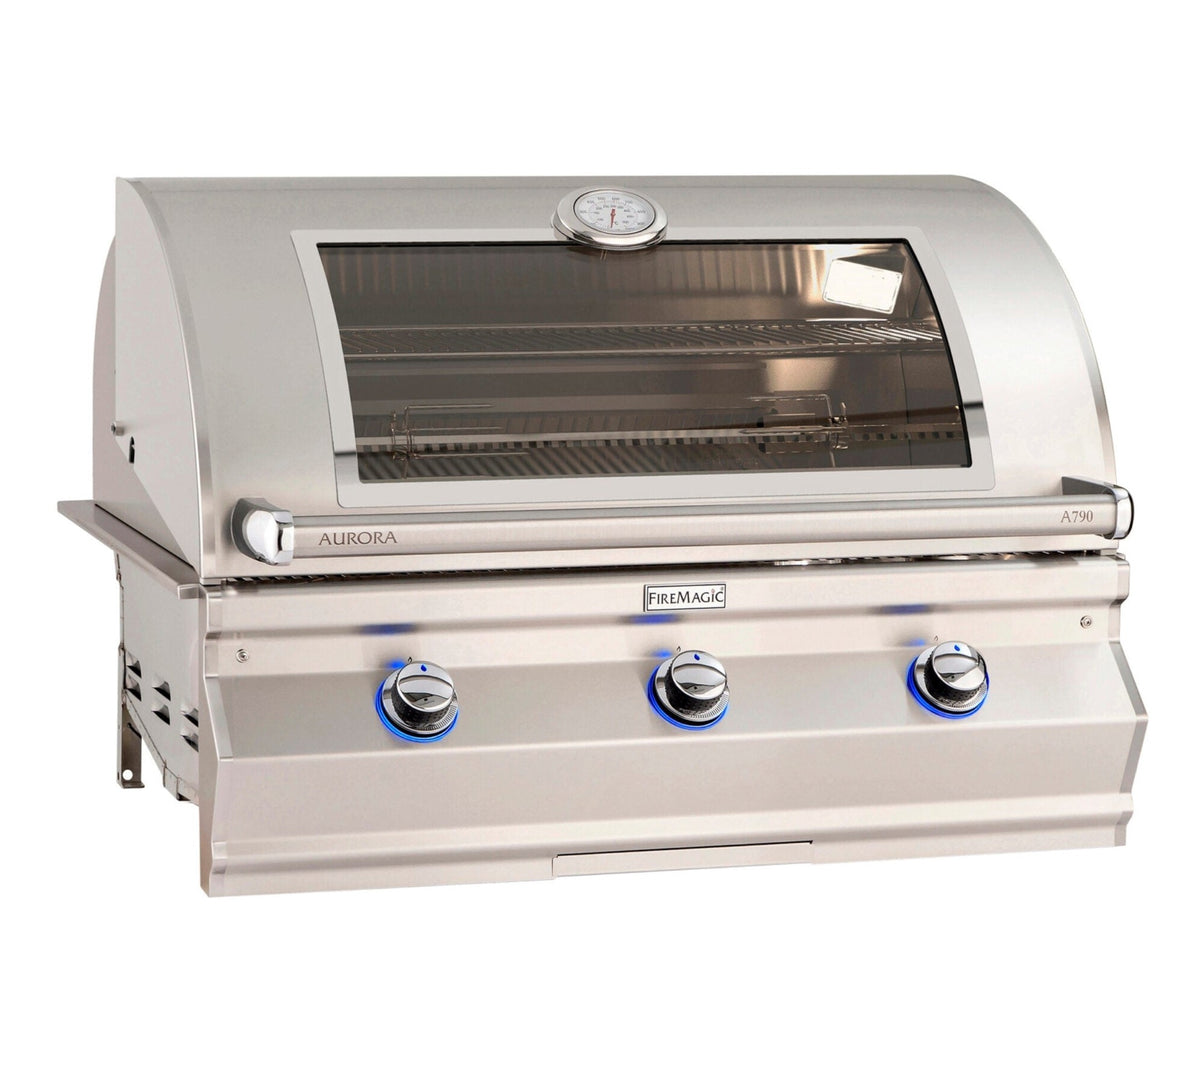 Firemagic Grills Fire Magic Aurora A790i Built-In Grill with Analog Thermometer / A790i